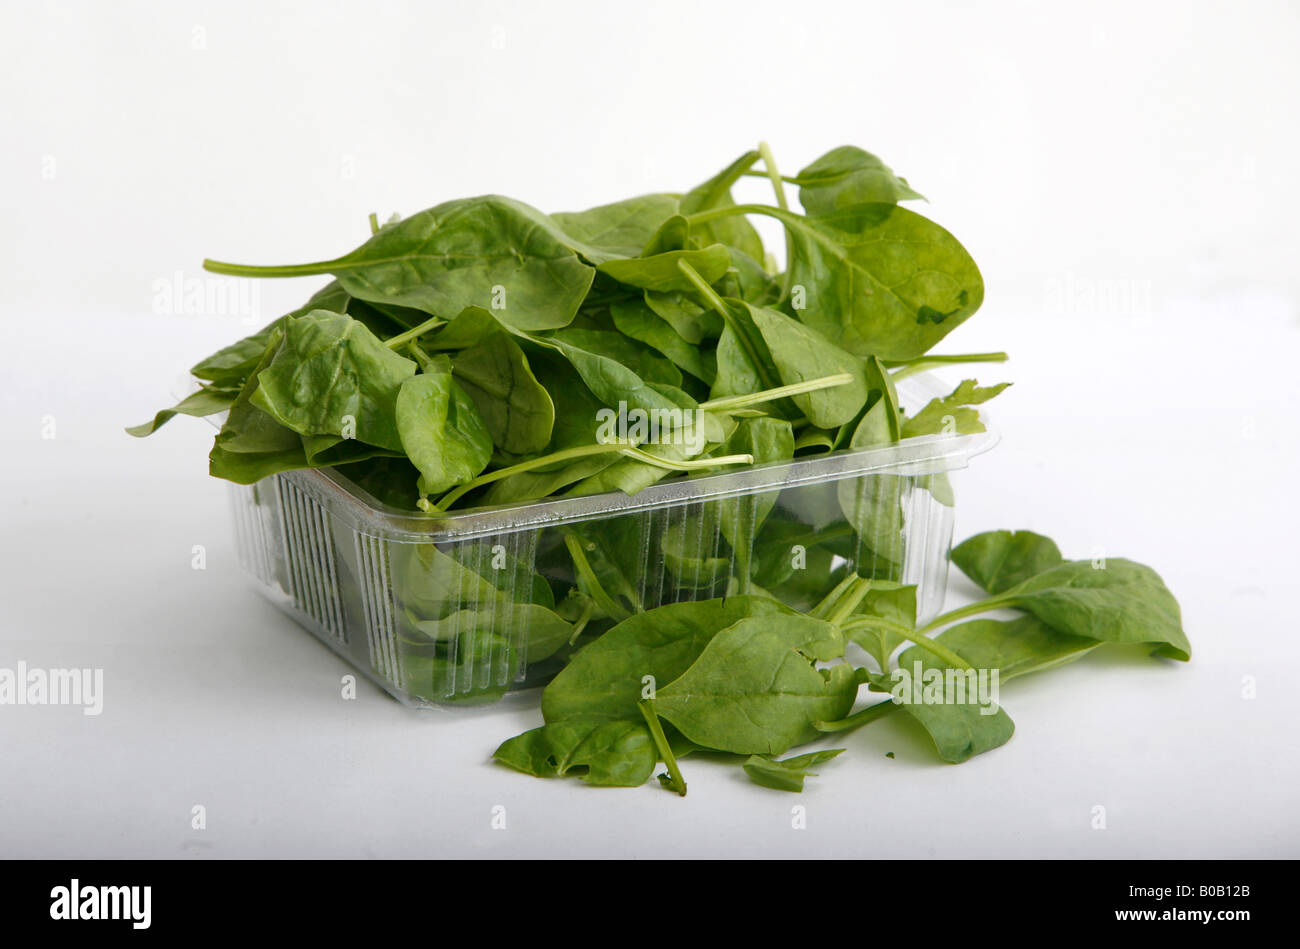 Download Baby Spinach Leaves In Plastic Packaging From Supermarket Stock Photo Alamy PSD Mockup Templates